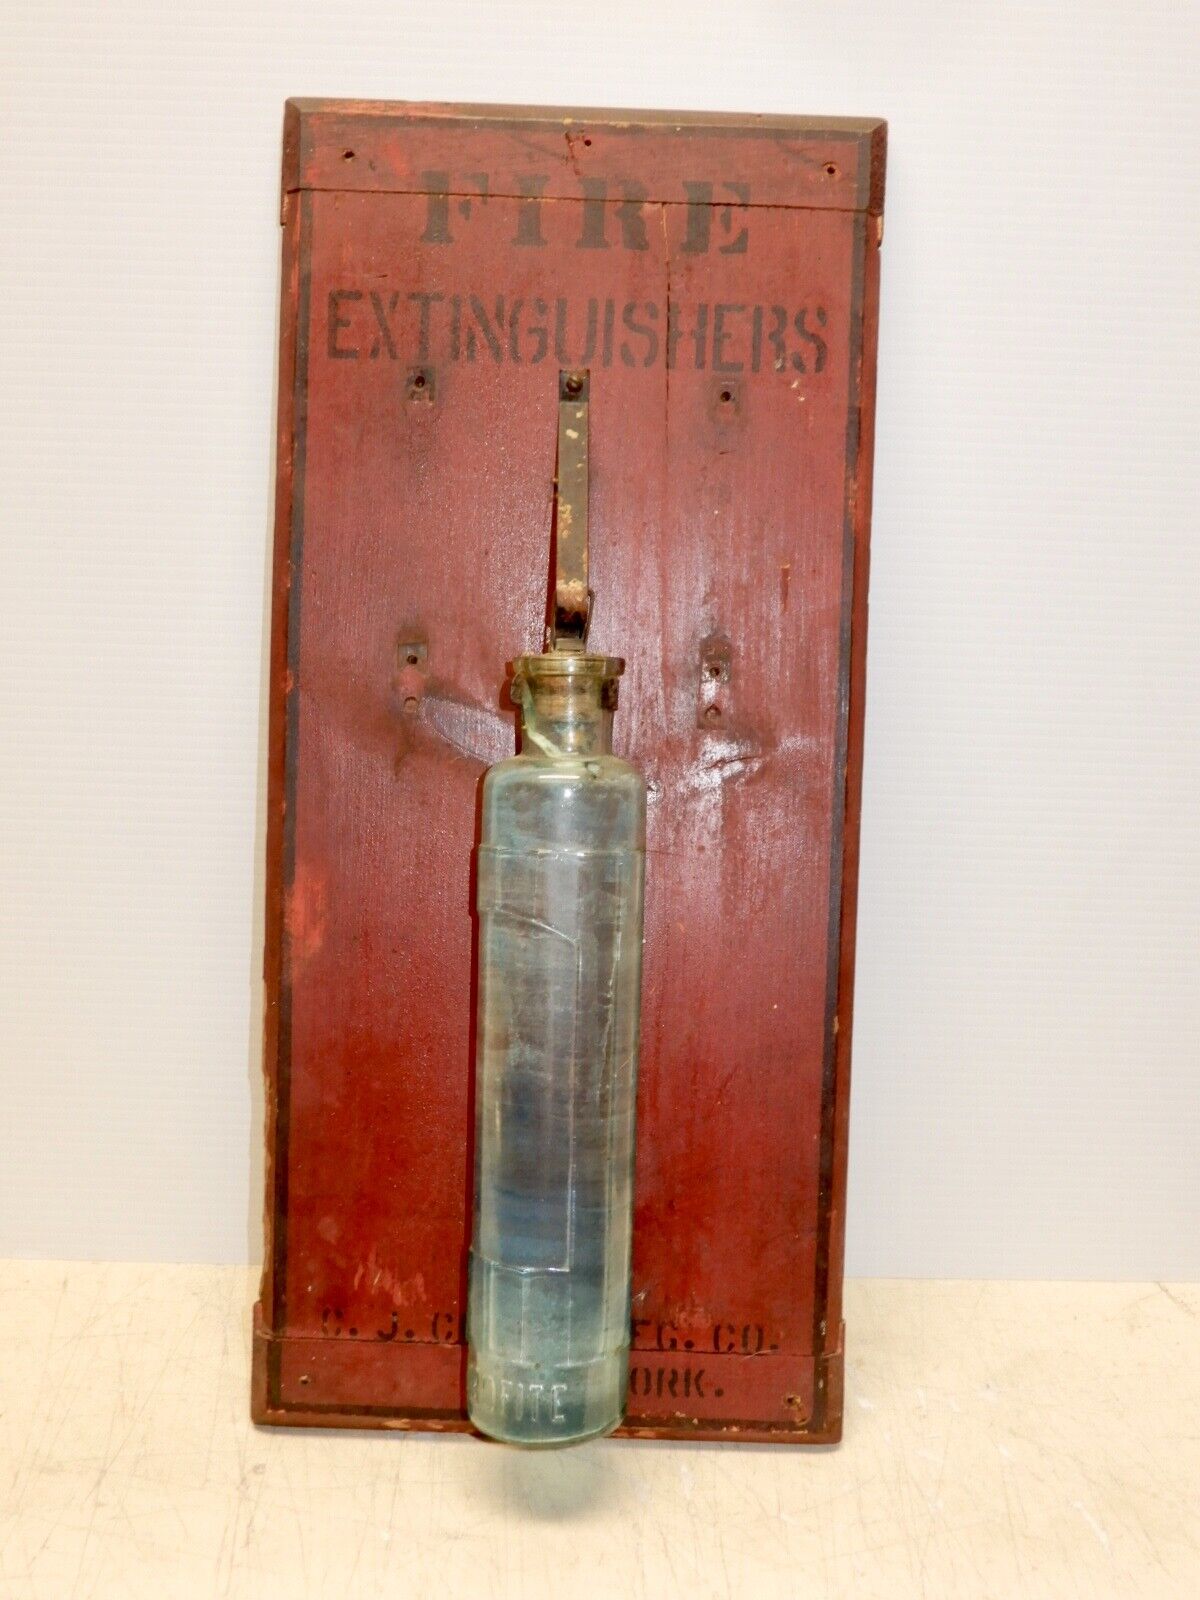 ANTIQUE PYROFITE FIRE EXSTINGUISHER J. CROSS NEW YORK WITH BACKBOARD